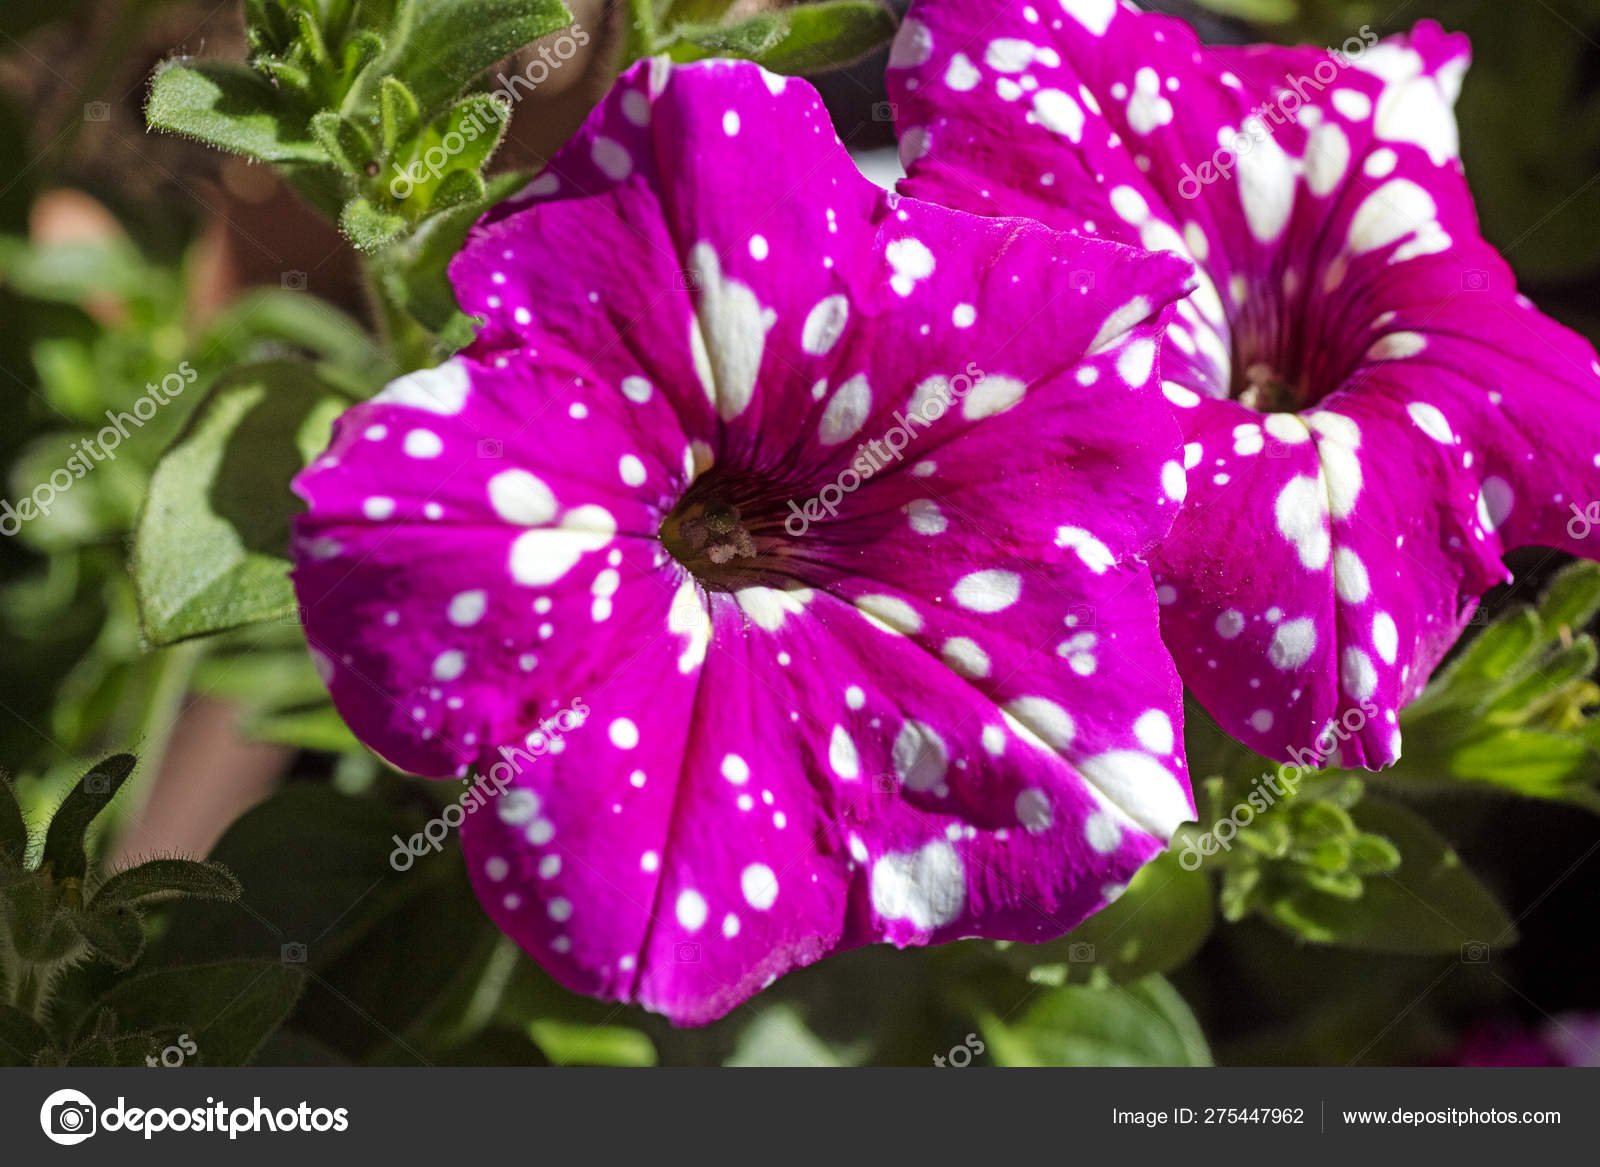 Petunia Axillaris Purple Flower With White Wild Flower Background Fine Art In High Quality Prints Products Stock Photo C Bakalaerozzphotography Yahoo Com 275447962